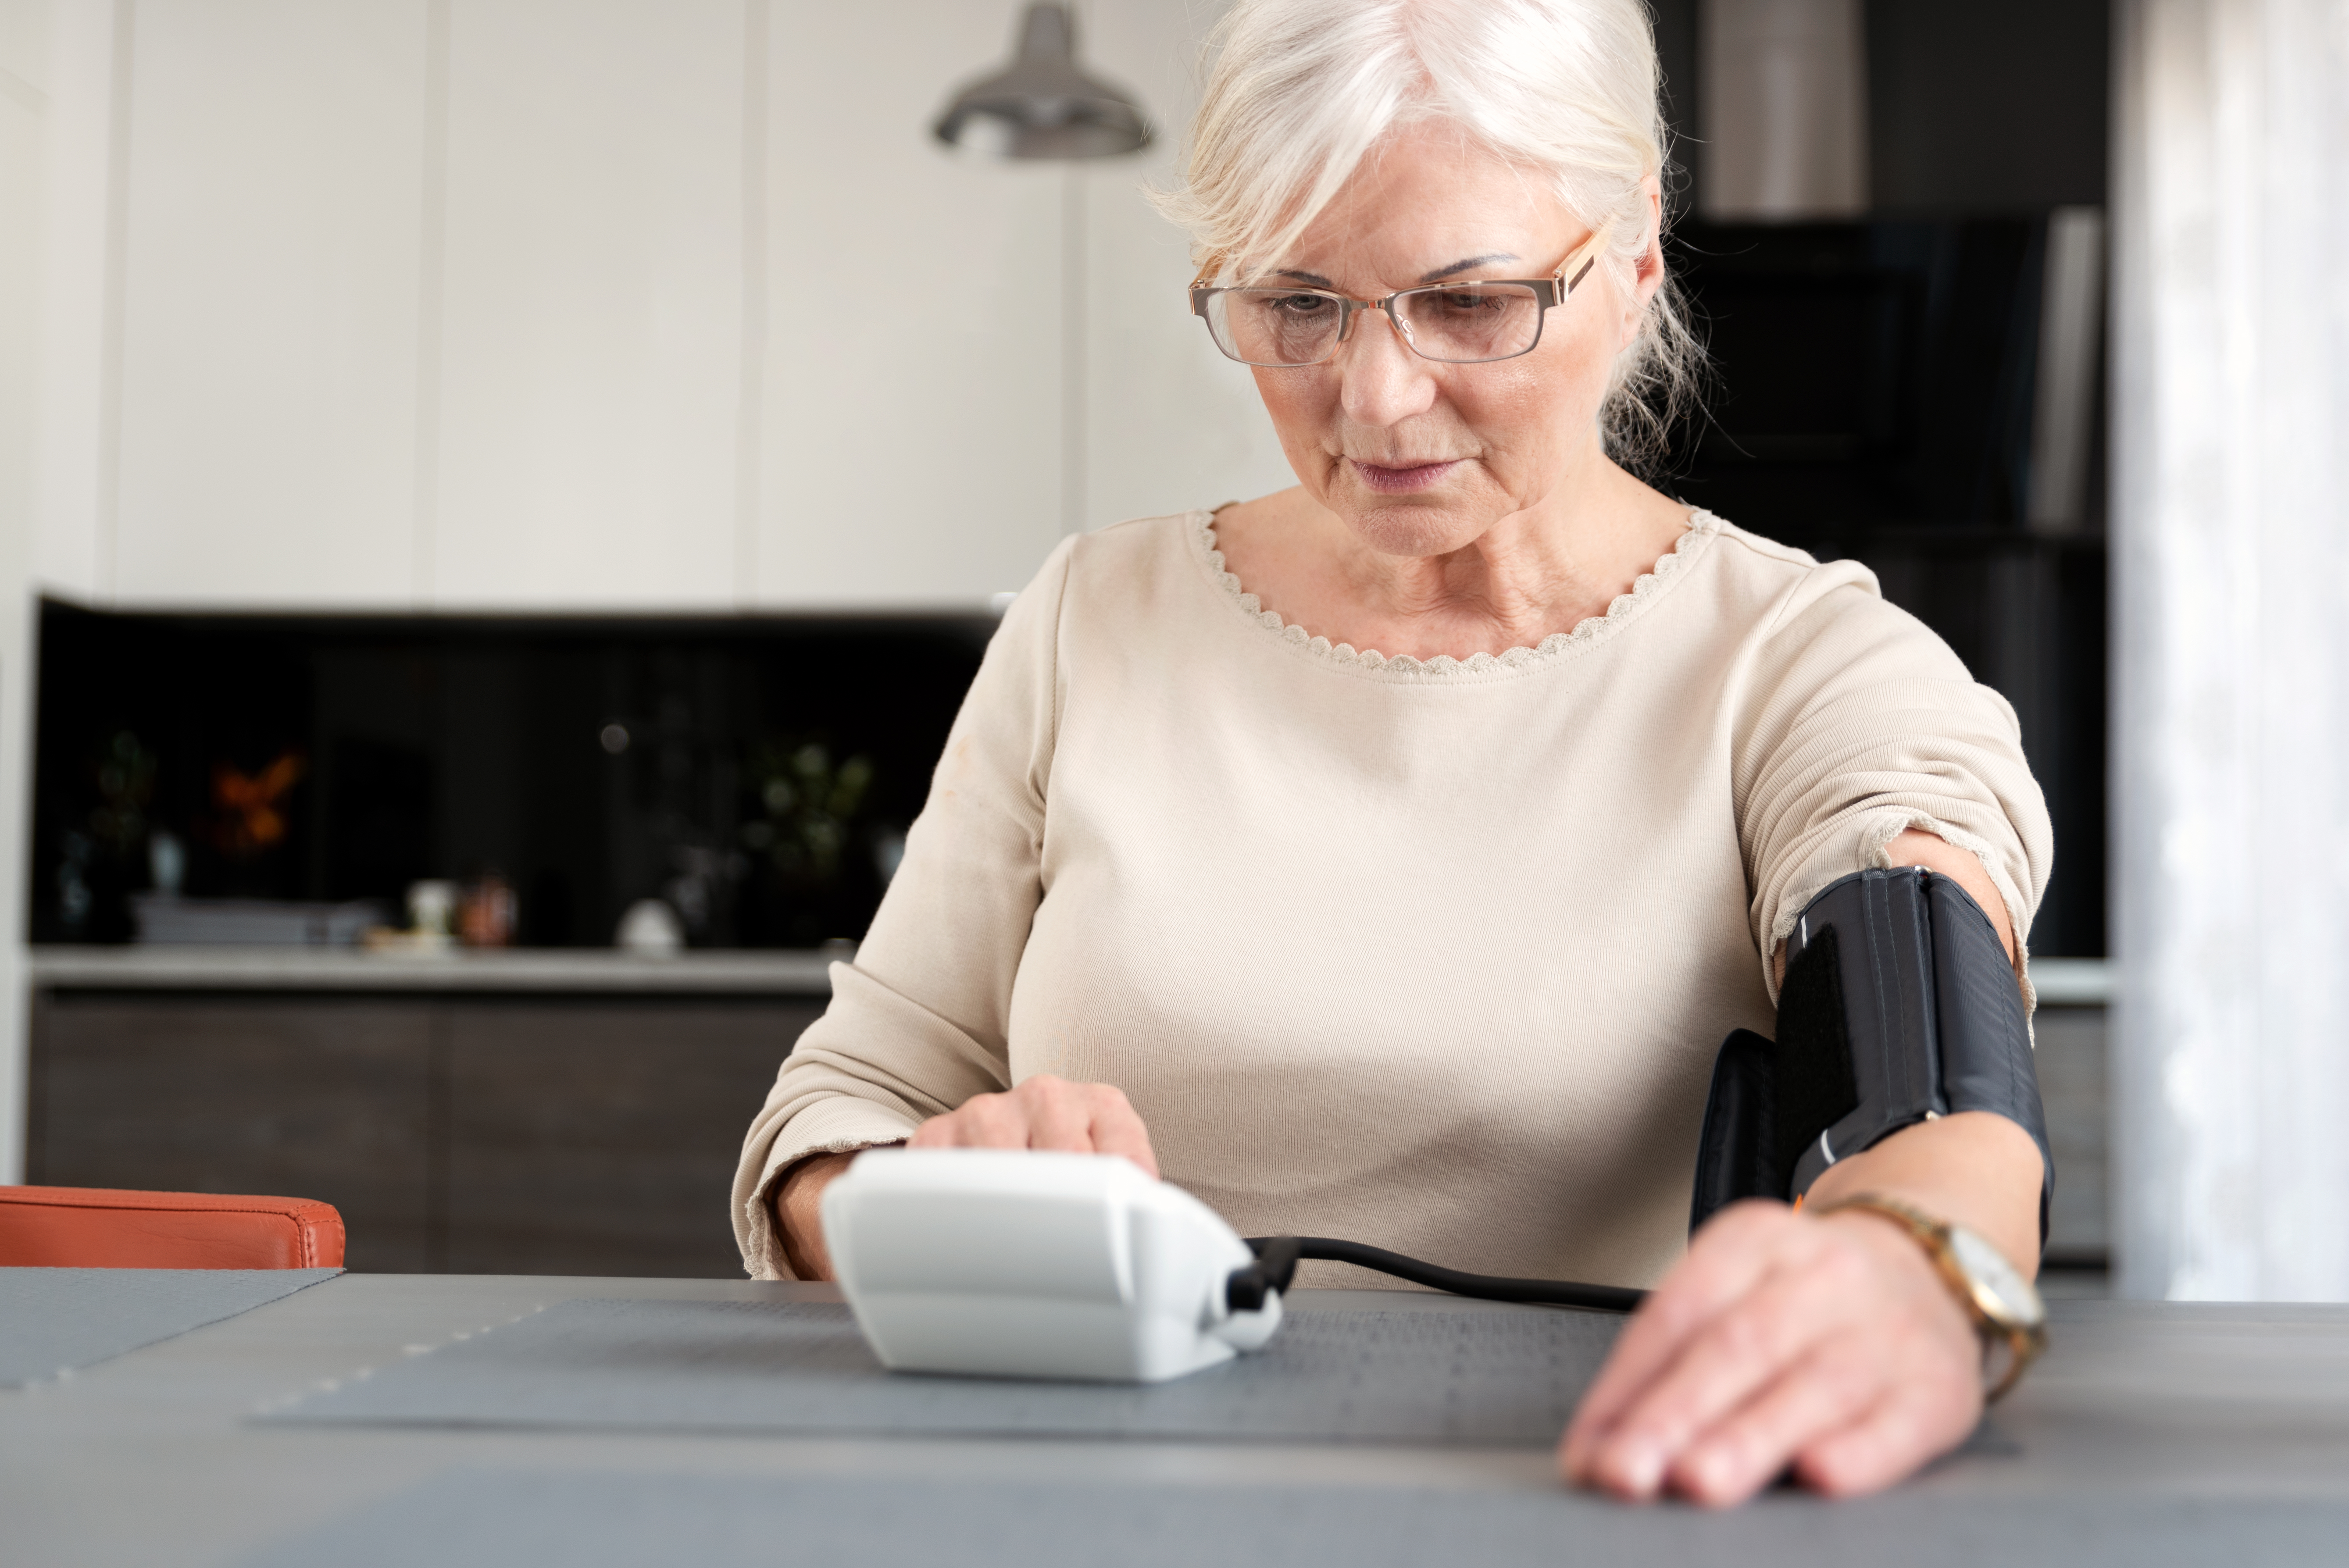 5 Tips To Increase Patient Engagement in Remote Patient Monitoring